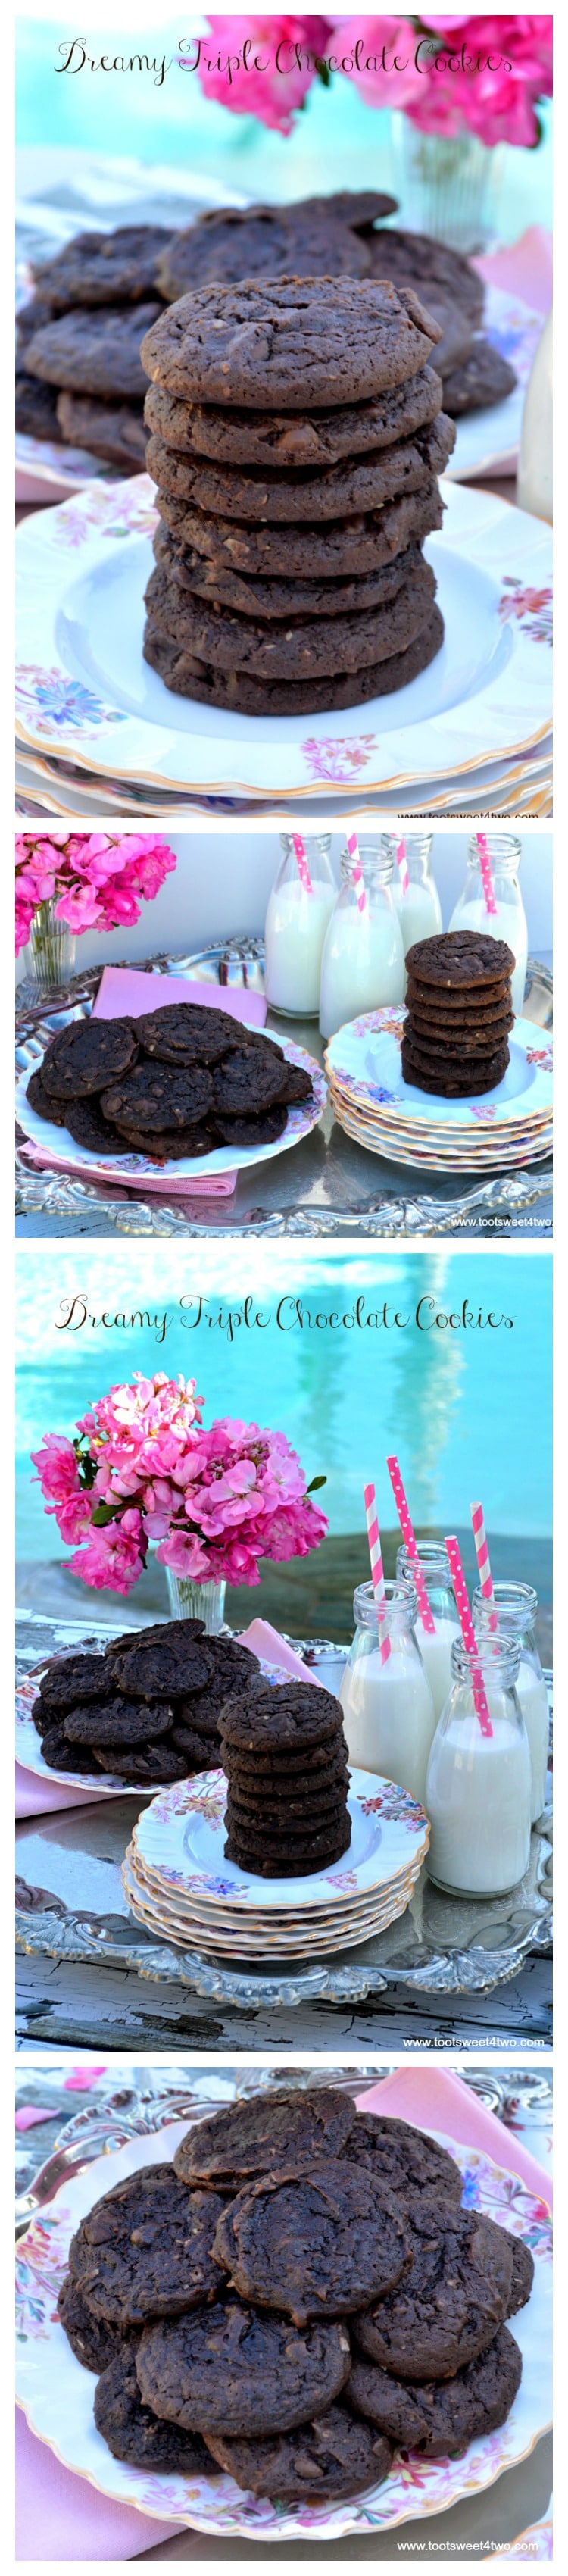 Dreamy Triple Chocolate Cookies - the best chocolate cookie made with a cake mix!